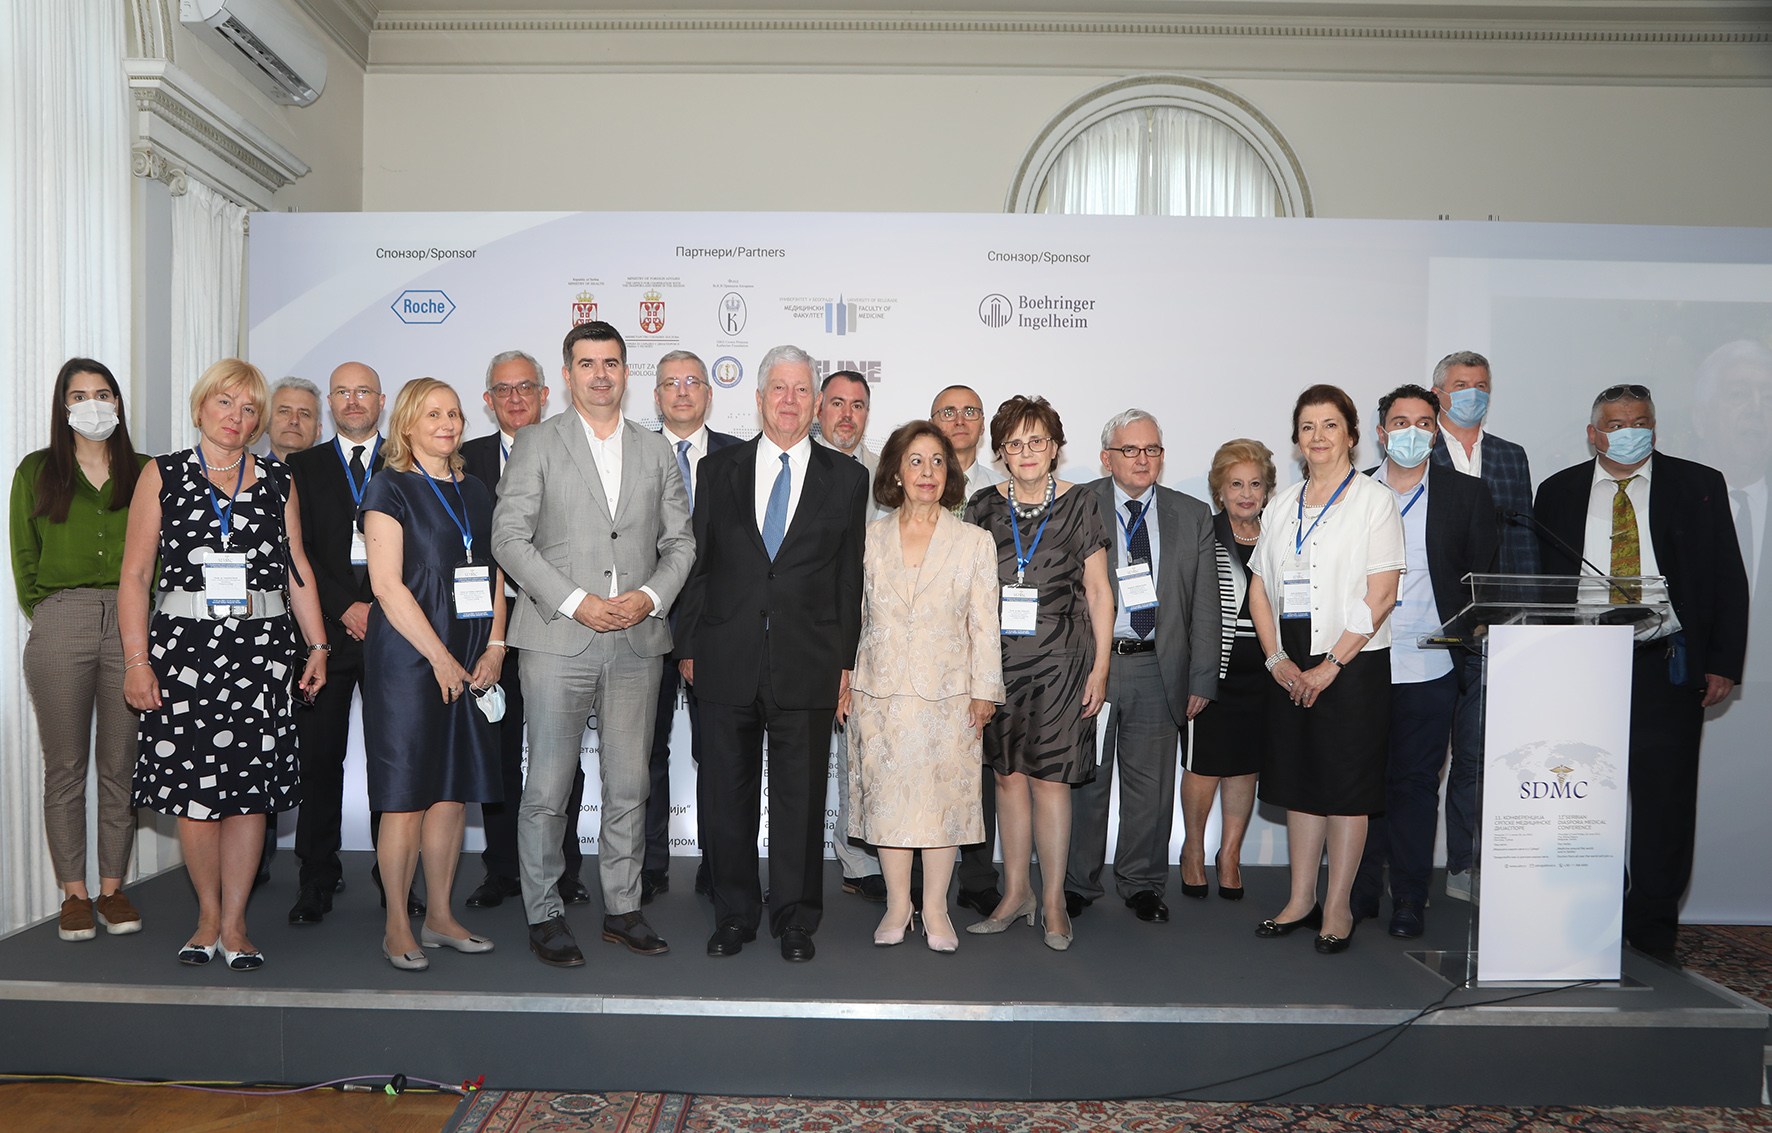 Opening of the 11th Serbian Medical Diaspora Conference in the White Palace, HRH Crown Prince Alexander and HRH Crown Princess Katherine with the Royal Medical Board and Partners of the Conference